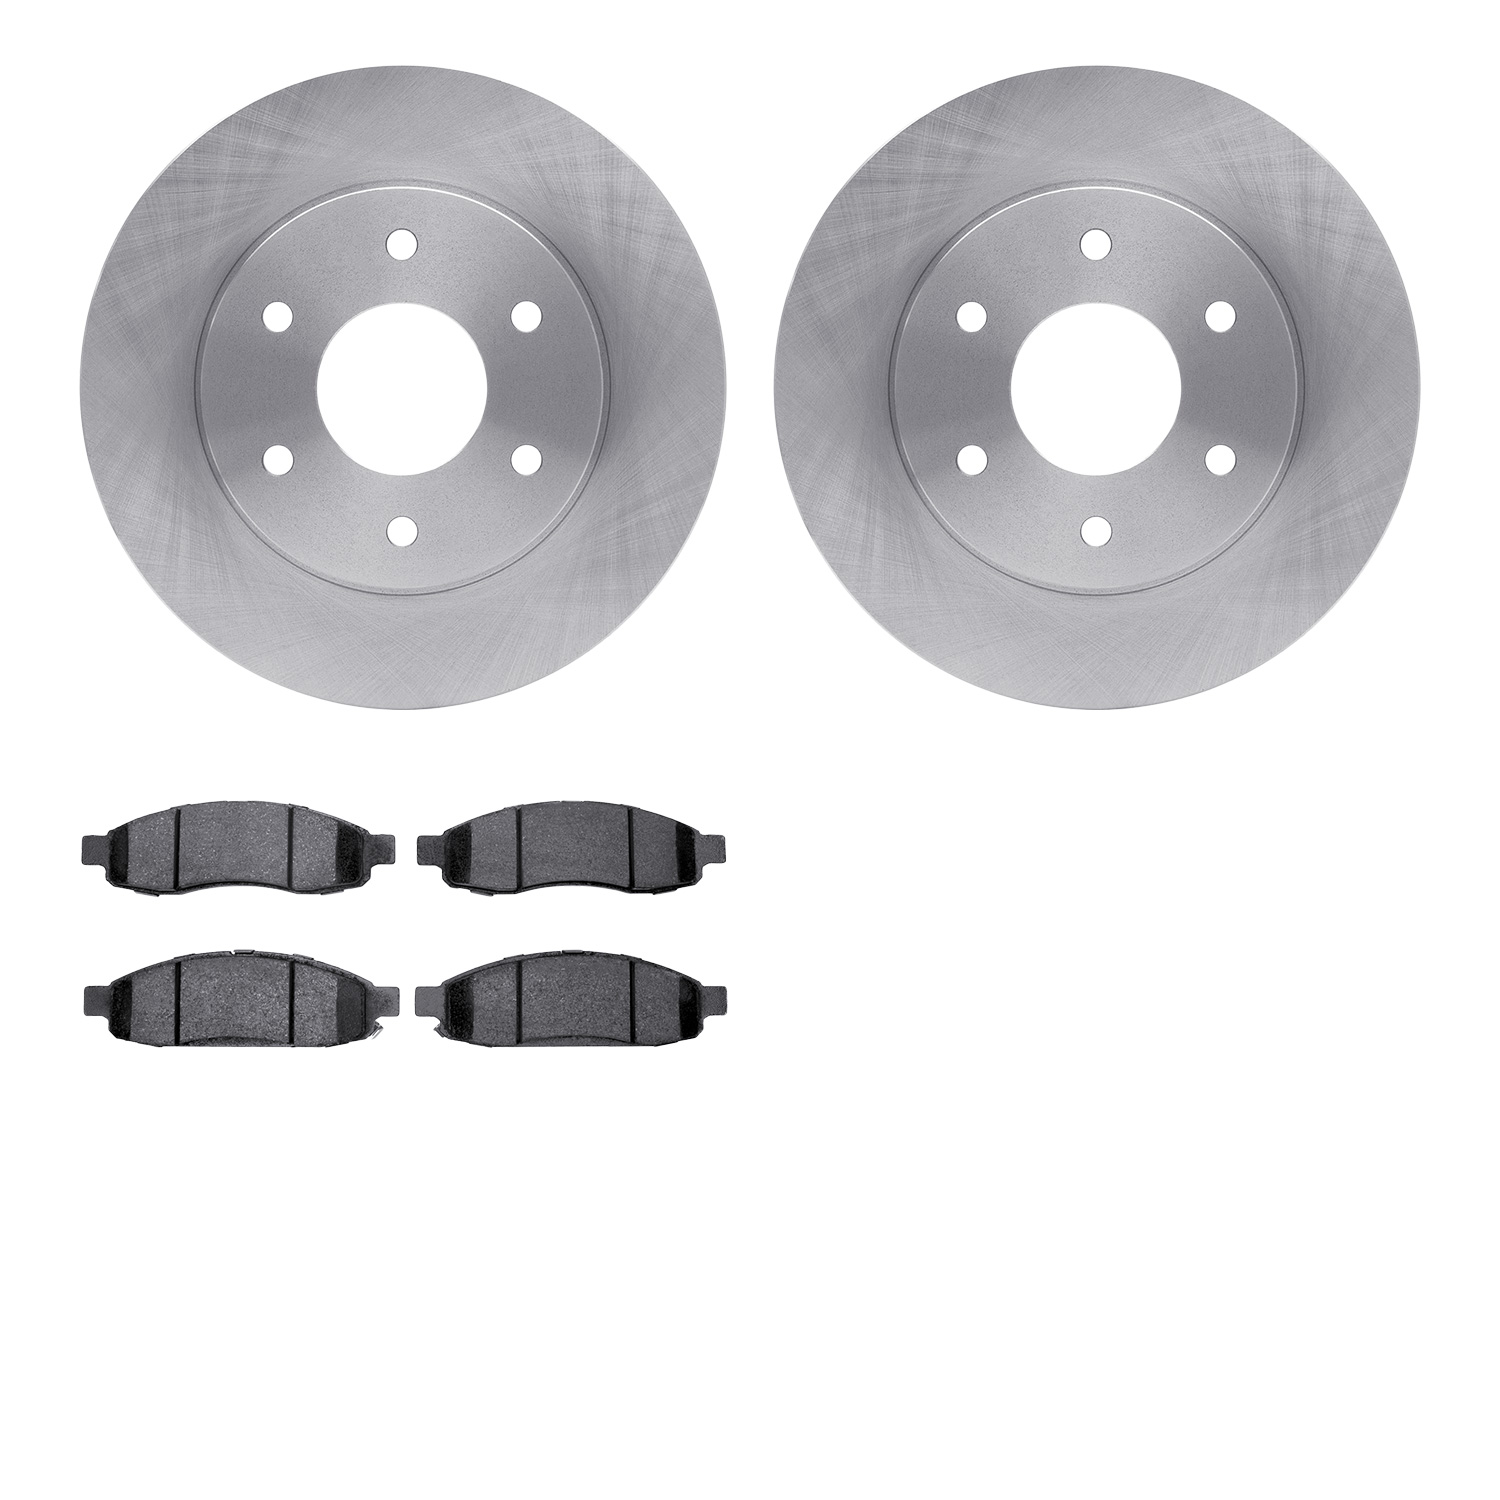 6402-67004 Brake Rotors with Ultimate-Duty Brake Pads, 2004-2005 Infiniti/Nissan, Position: Front